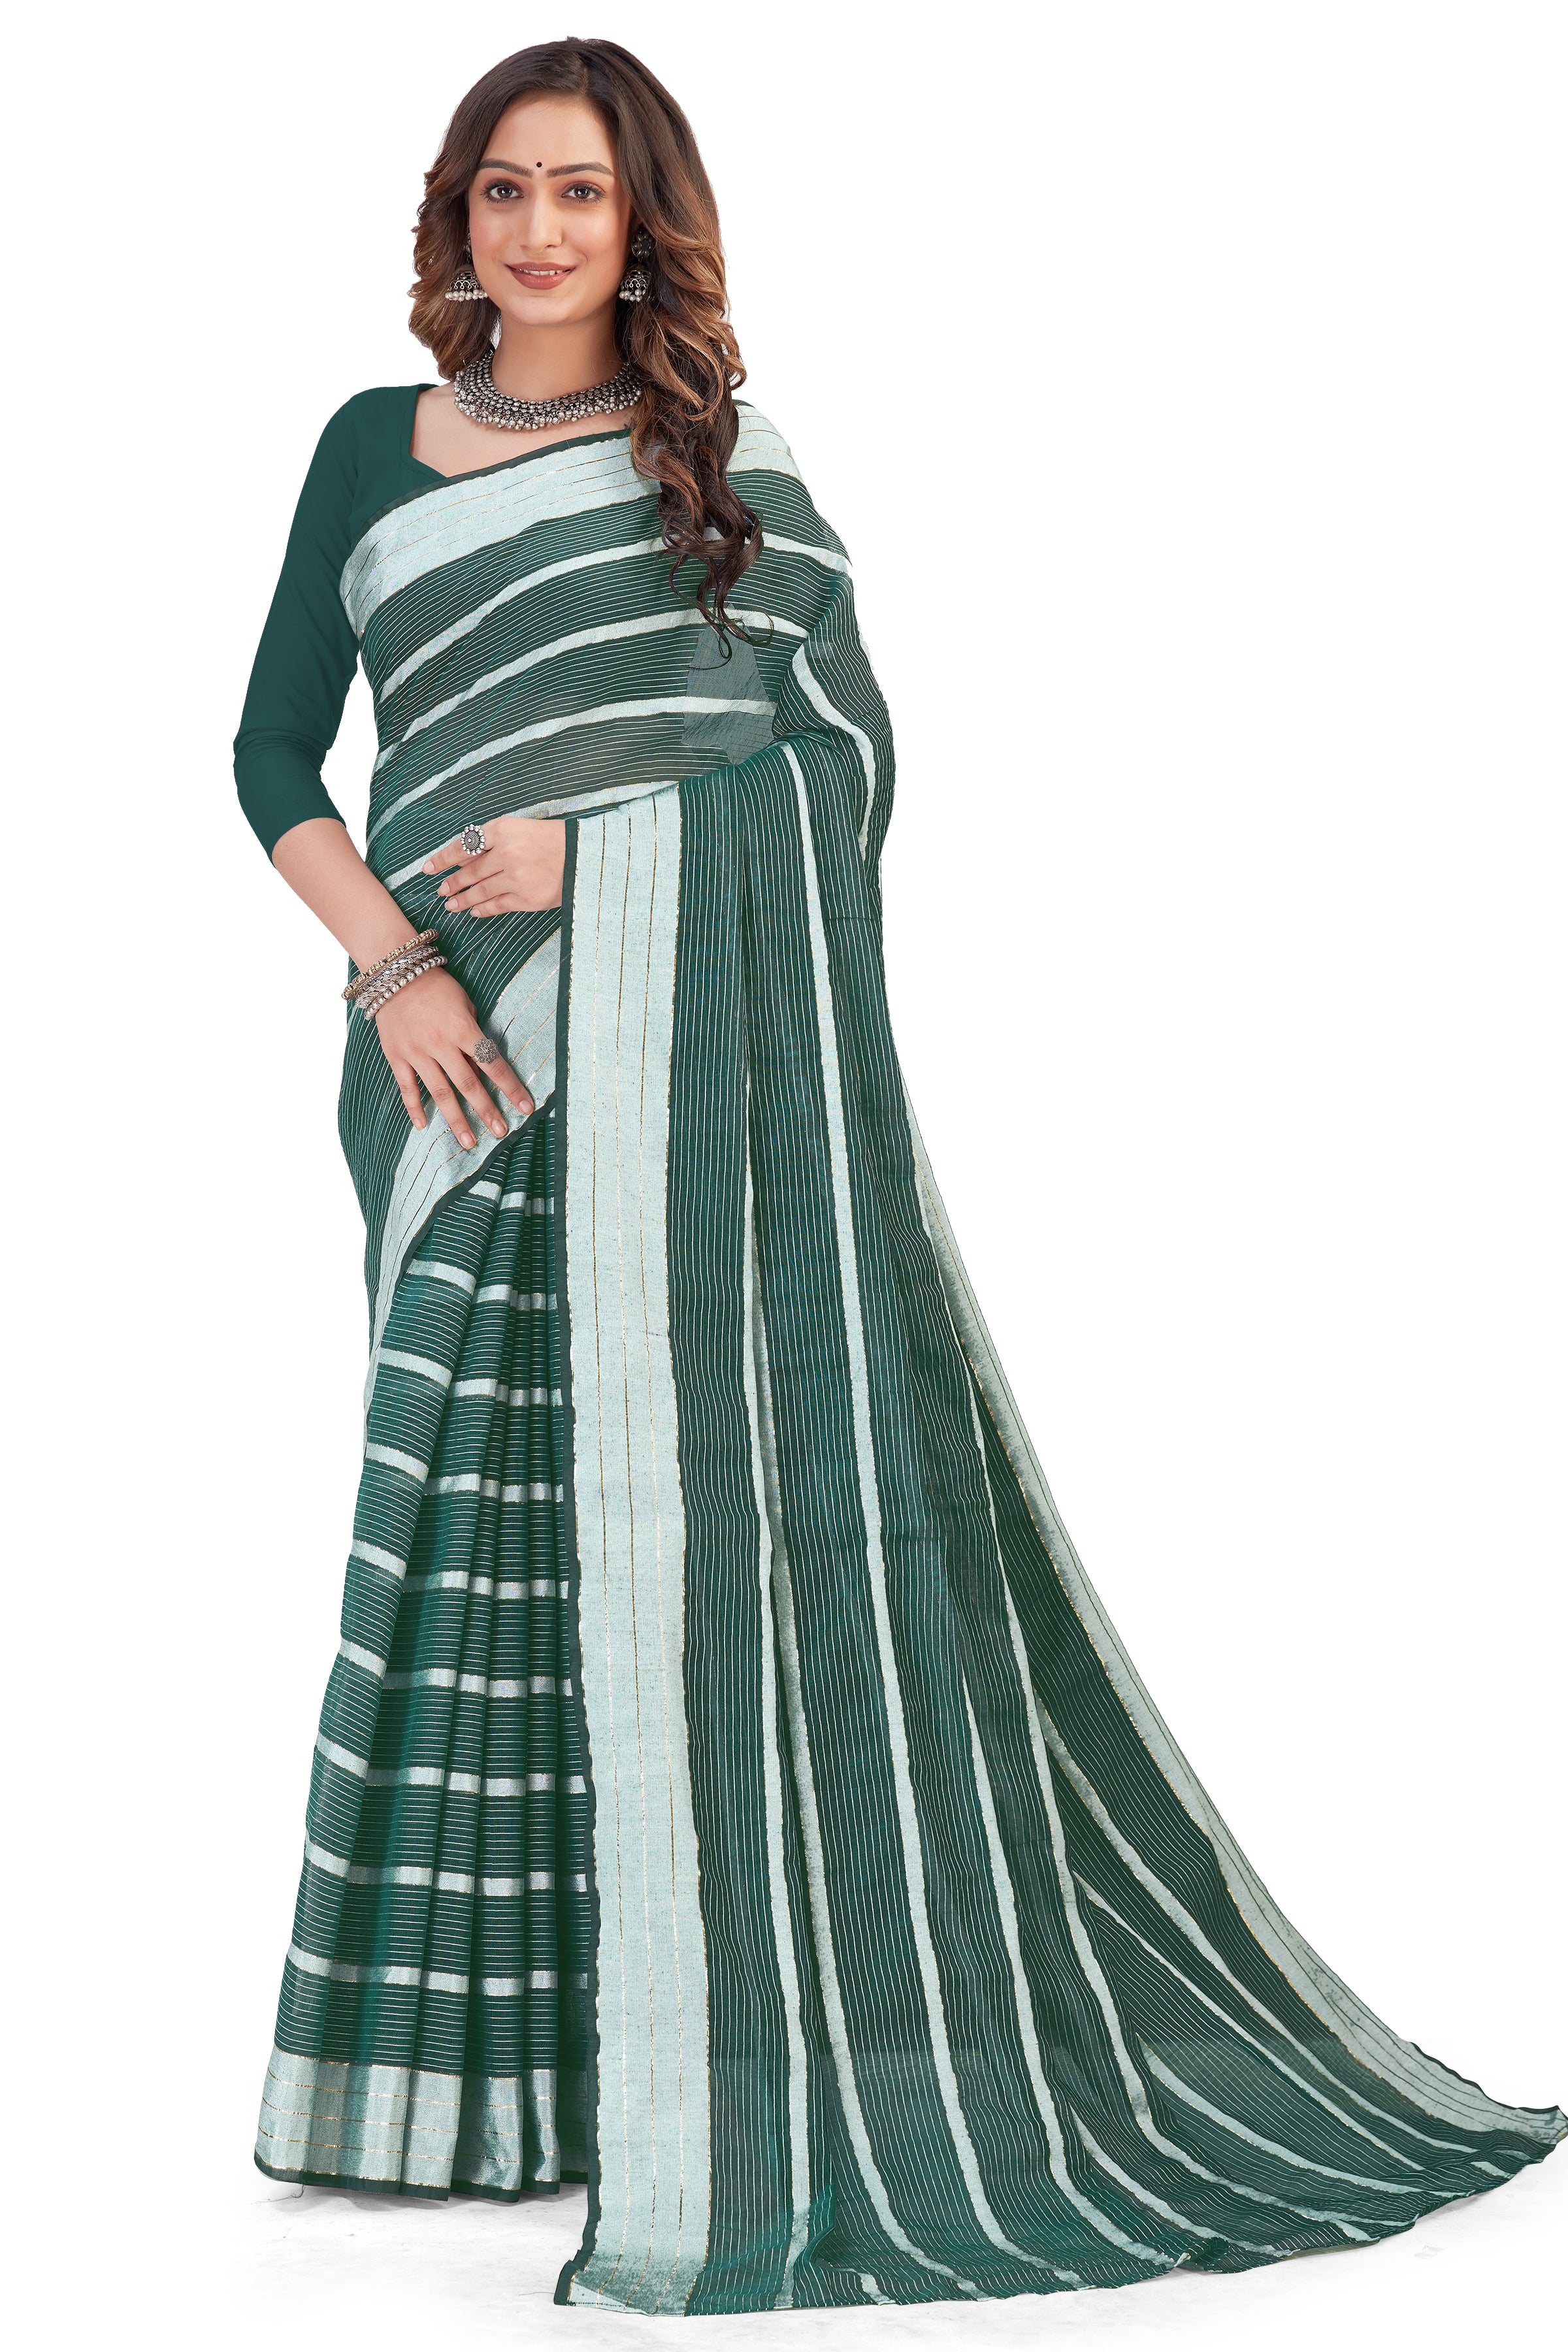 Women's Solid Self woven Striped Daily Wear Formal Cotton Bleand Saree With Blouse Piece (Rama) - NIMIDHYA